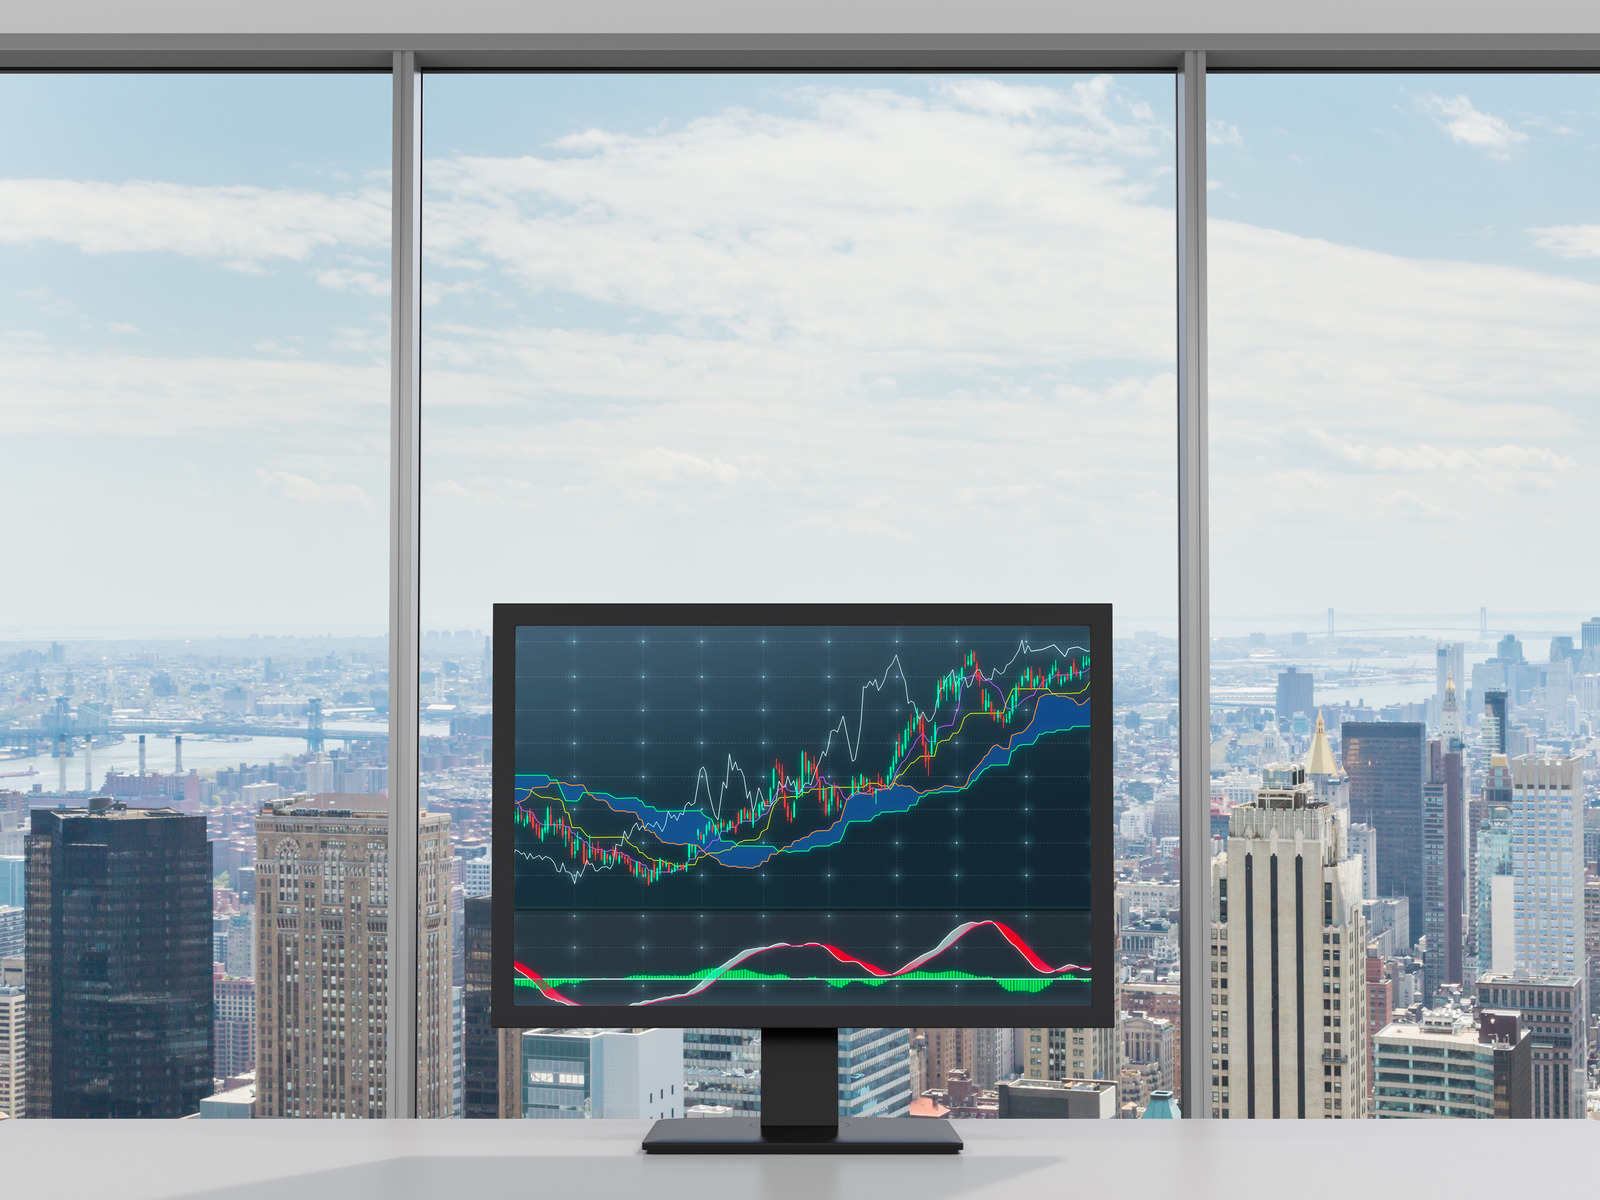 Choosing the best Forex and CFD broker in 2020